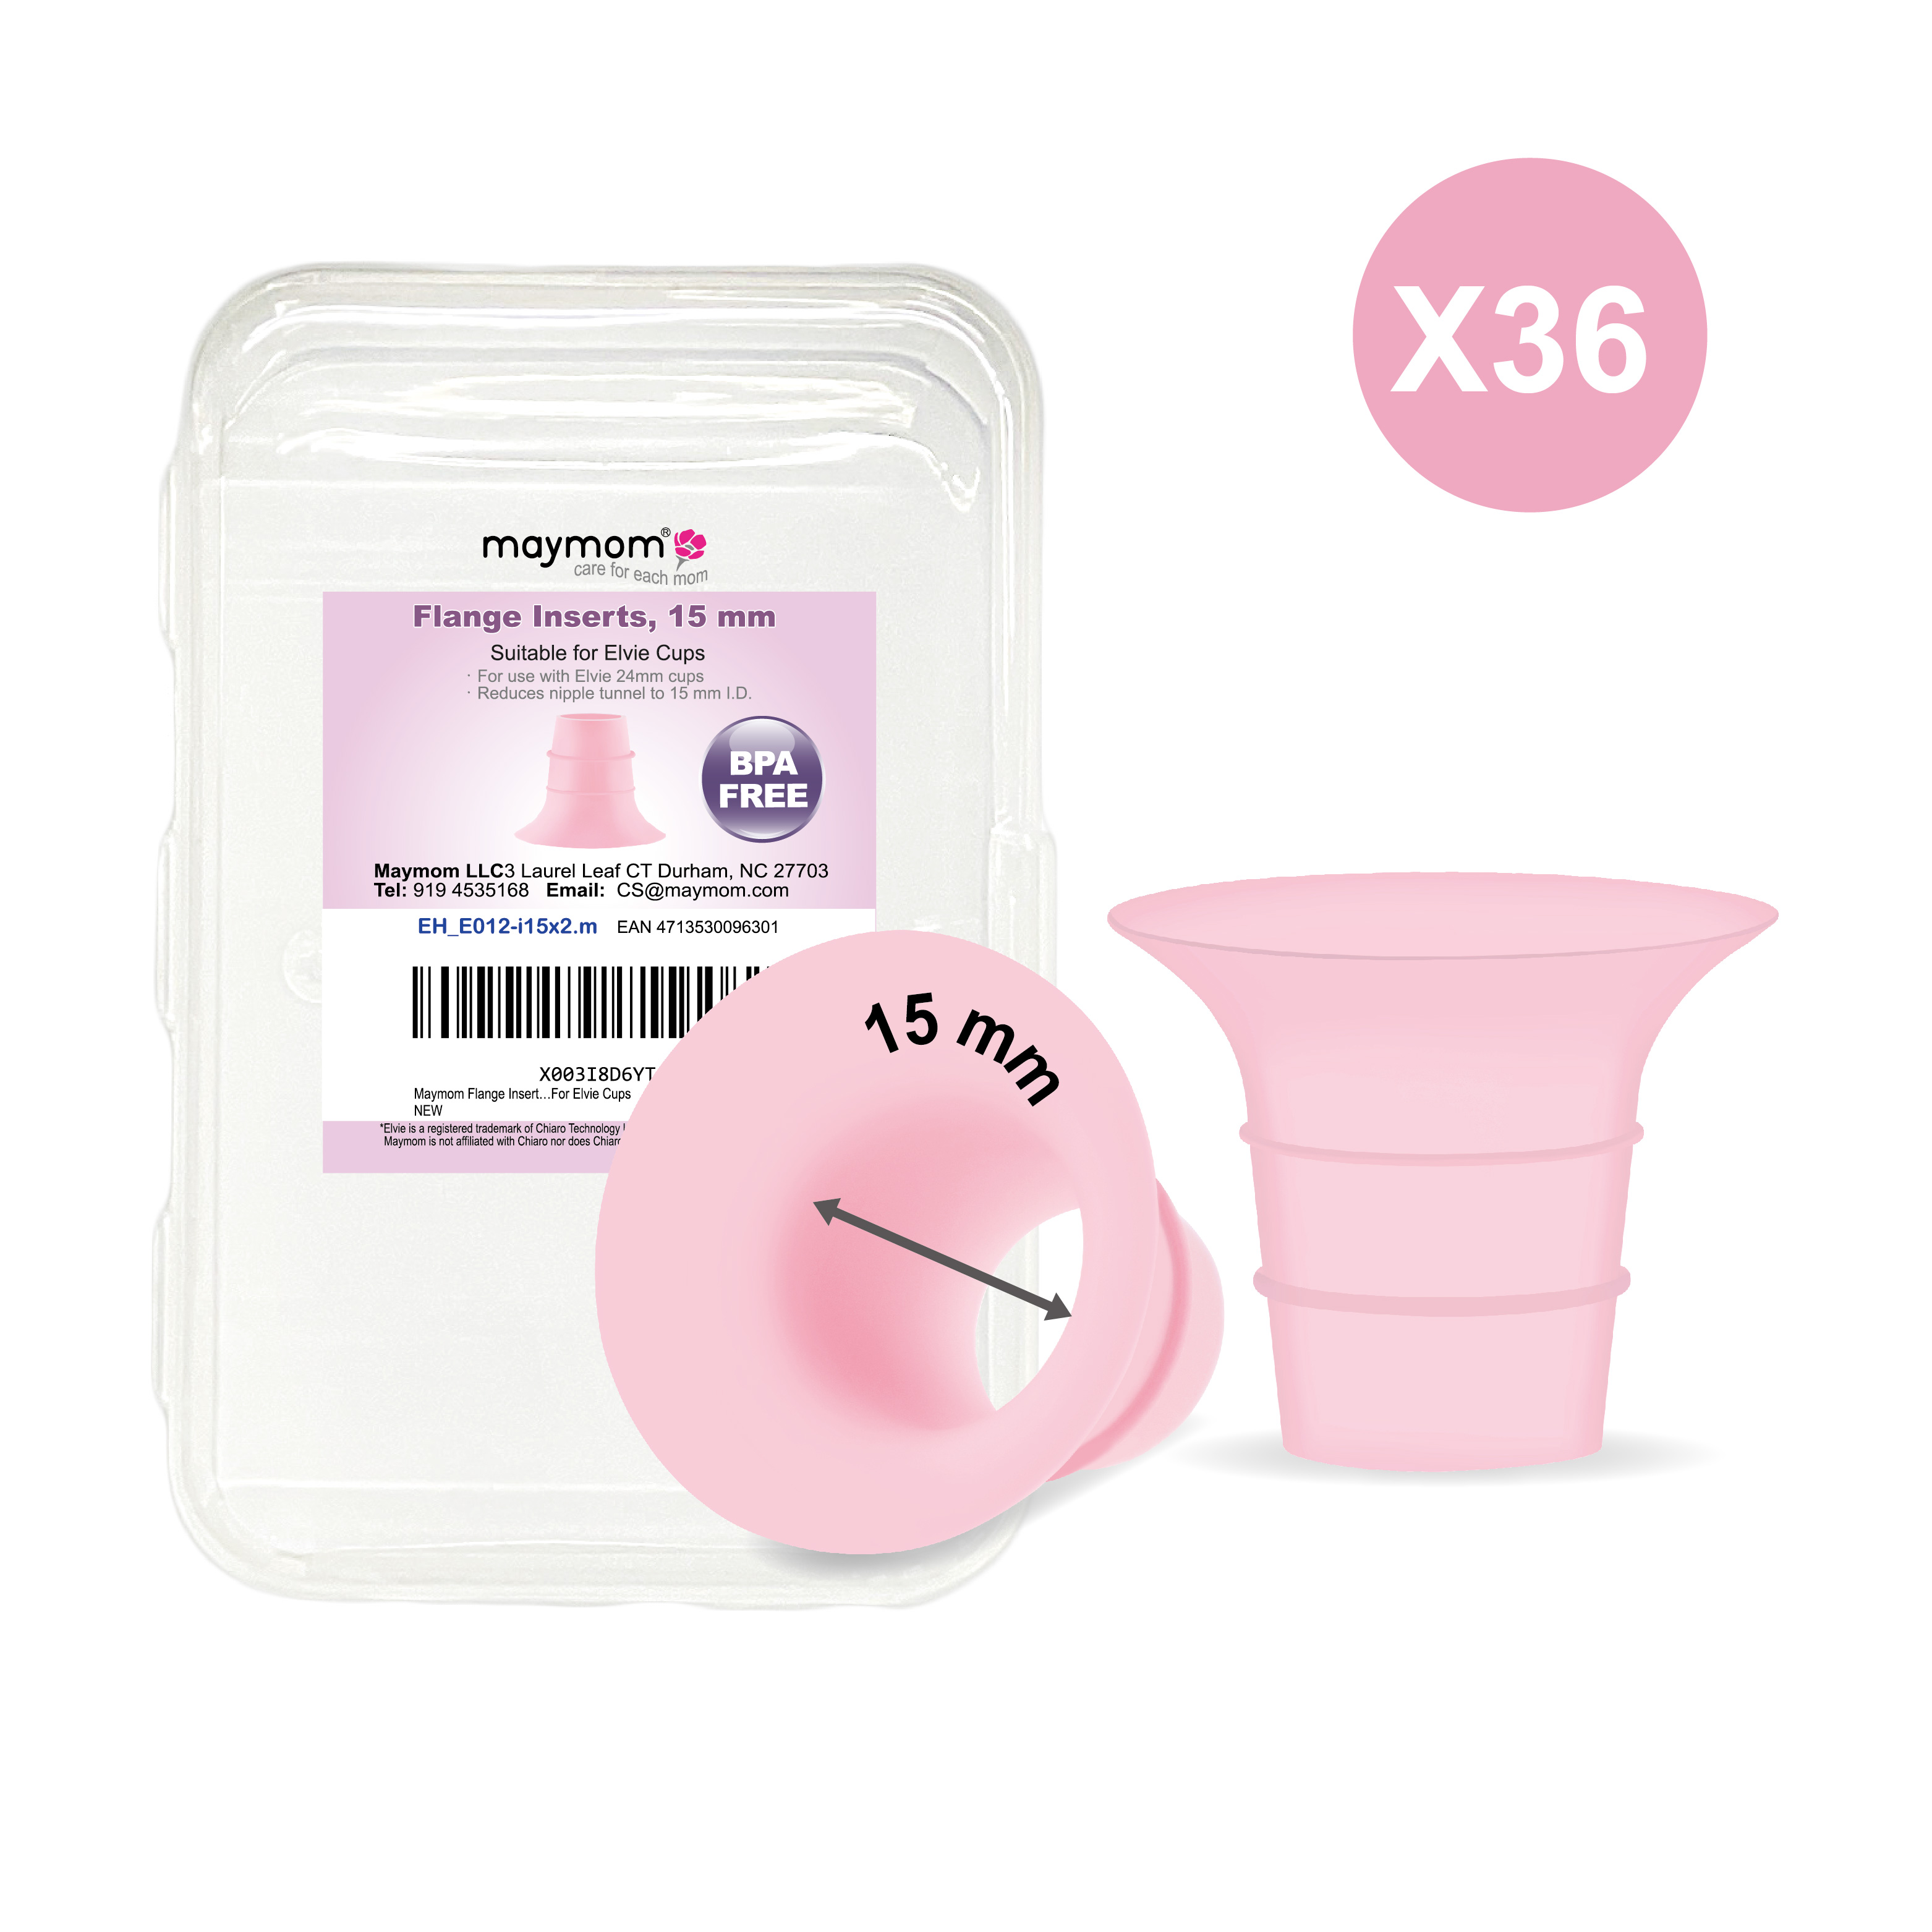 Maymom Flange Insert 15 mm (Short, Pink), 2 pcs/pack, 36 packs/kit, for USA ONLY, Compatible with Elvie Stride Cup (24mm)